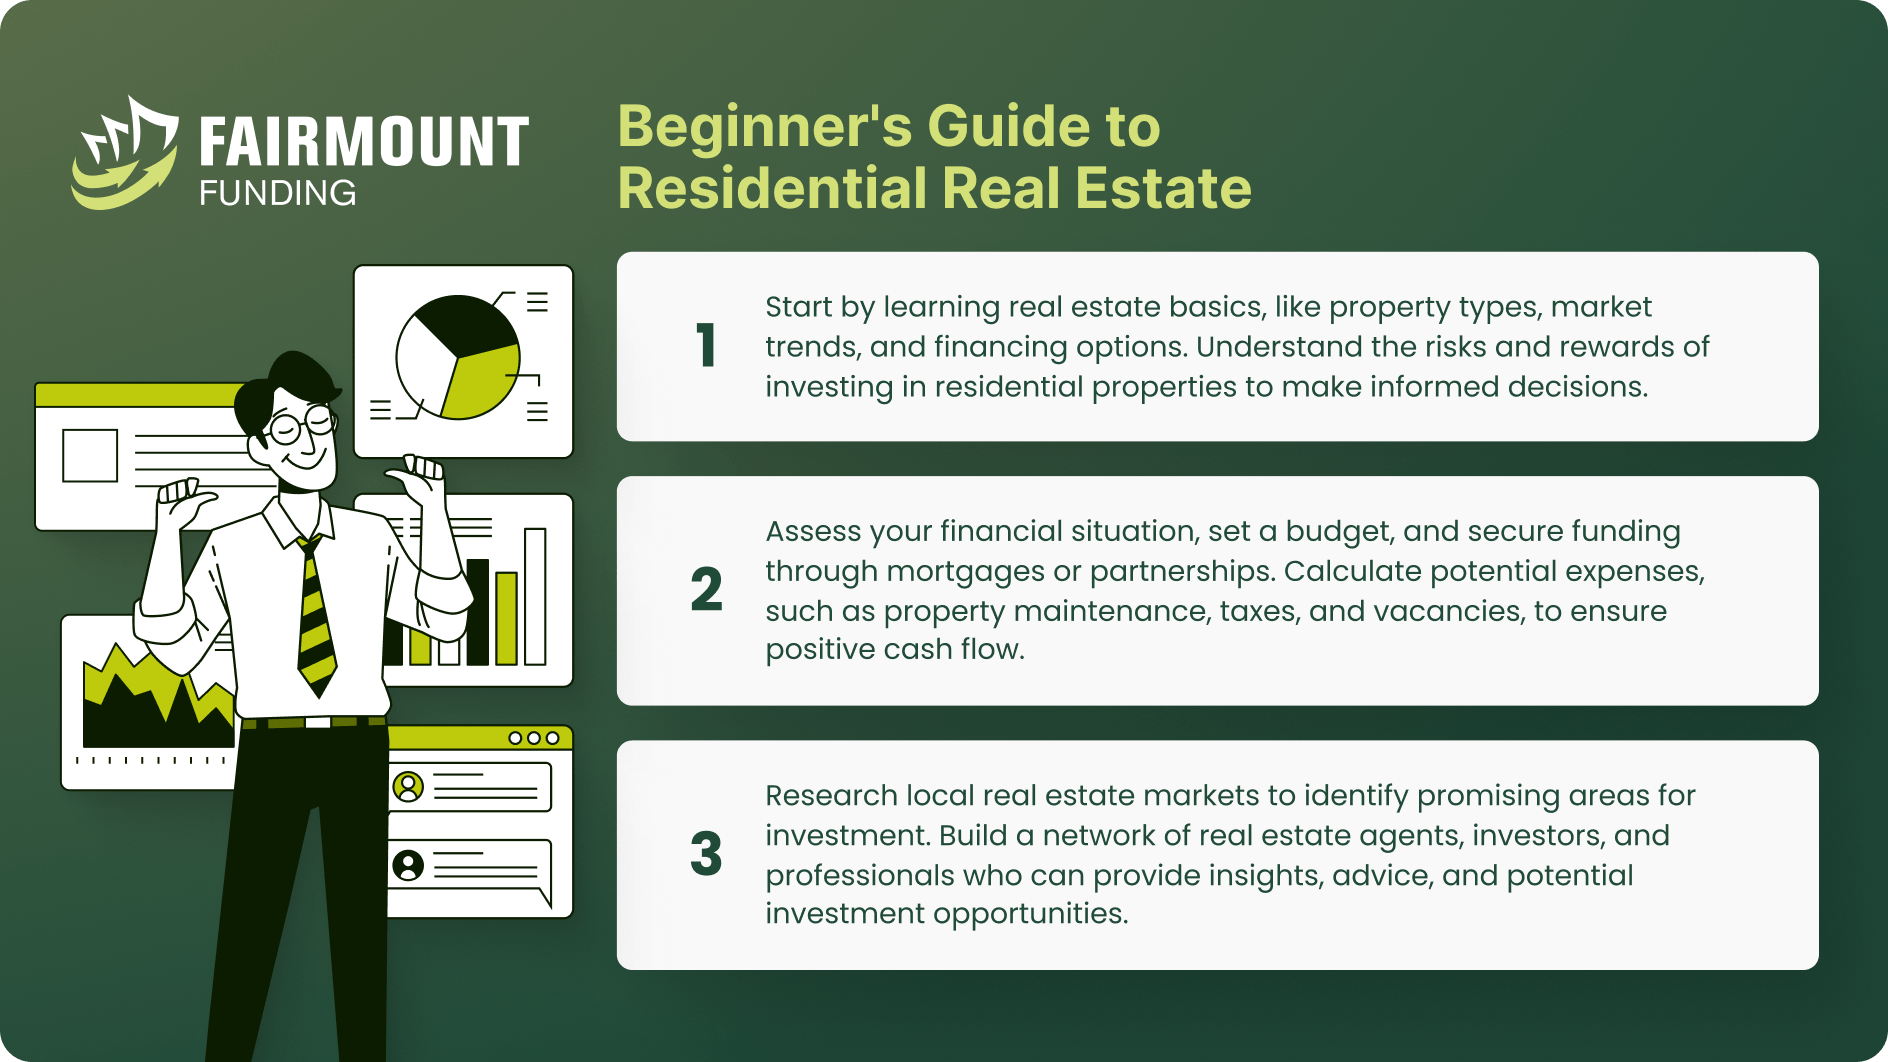 5 ways to get started in residential real estate investing